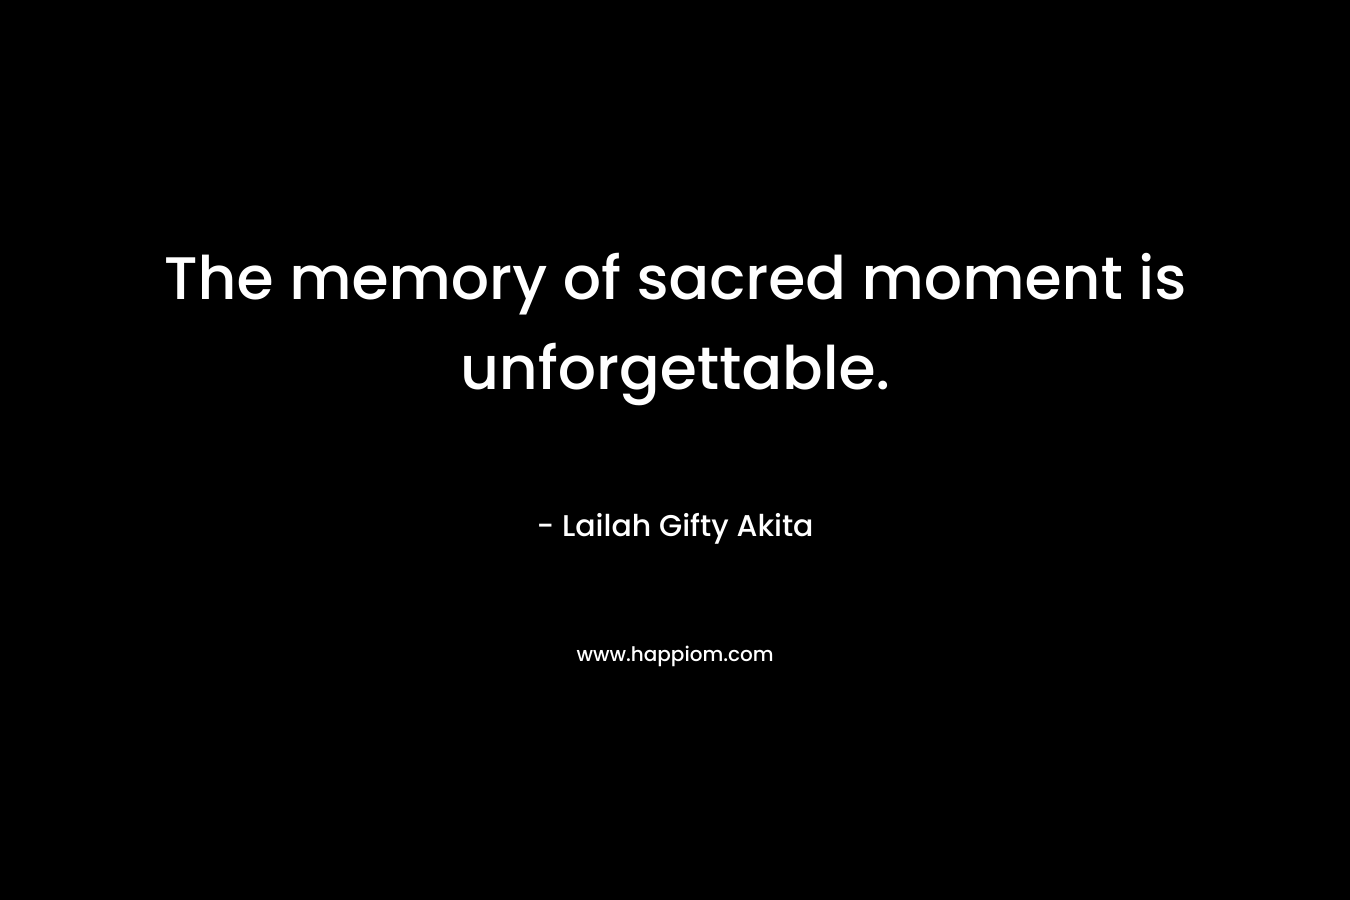 The memory of sacred moment is unforgettable.